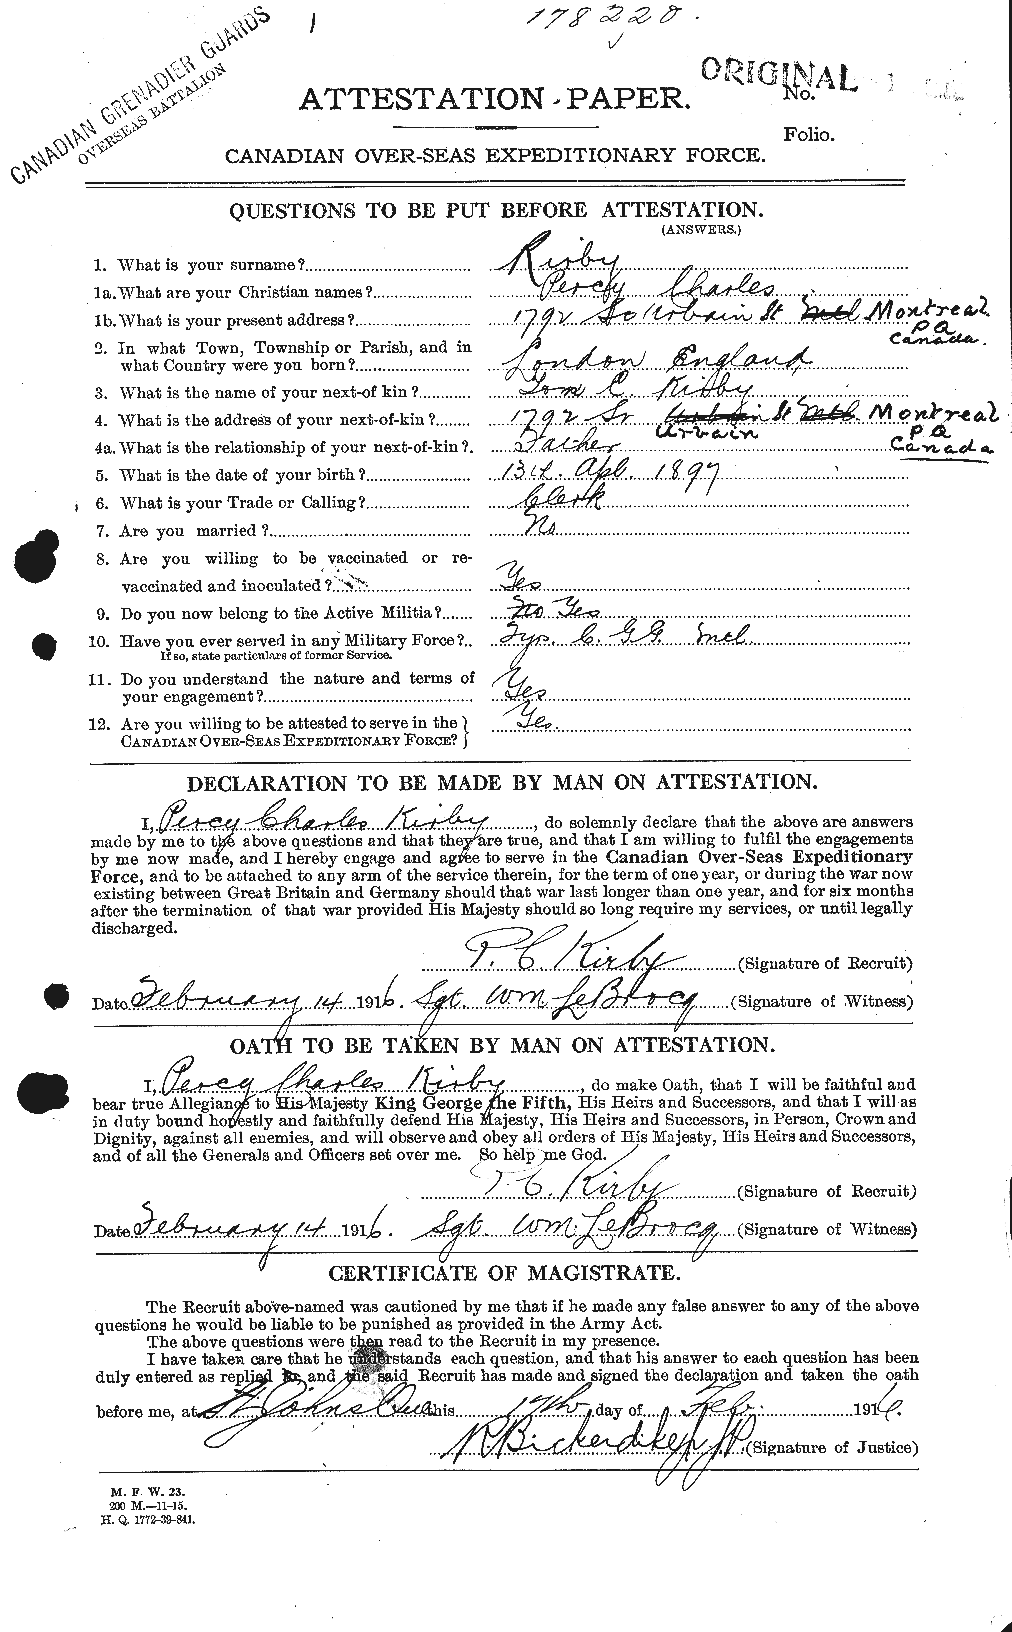 Personnel Records of the First World War - CEF 437259a